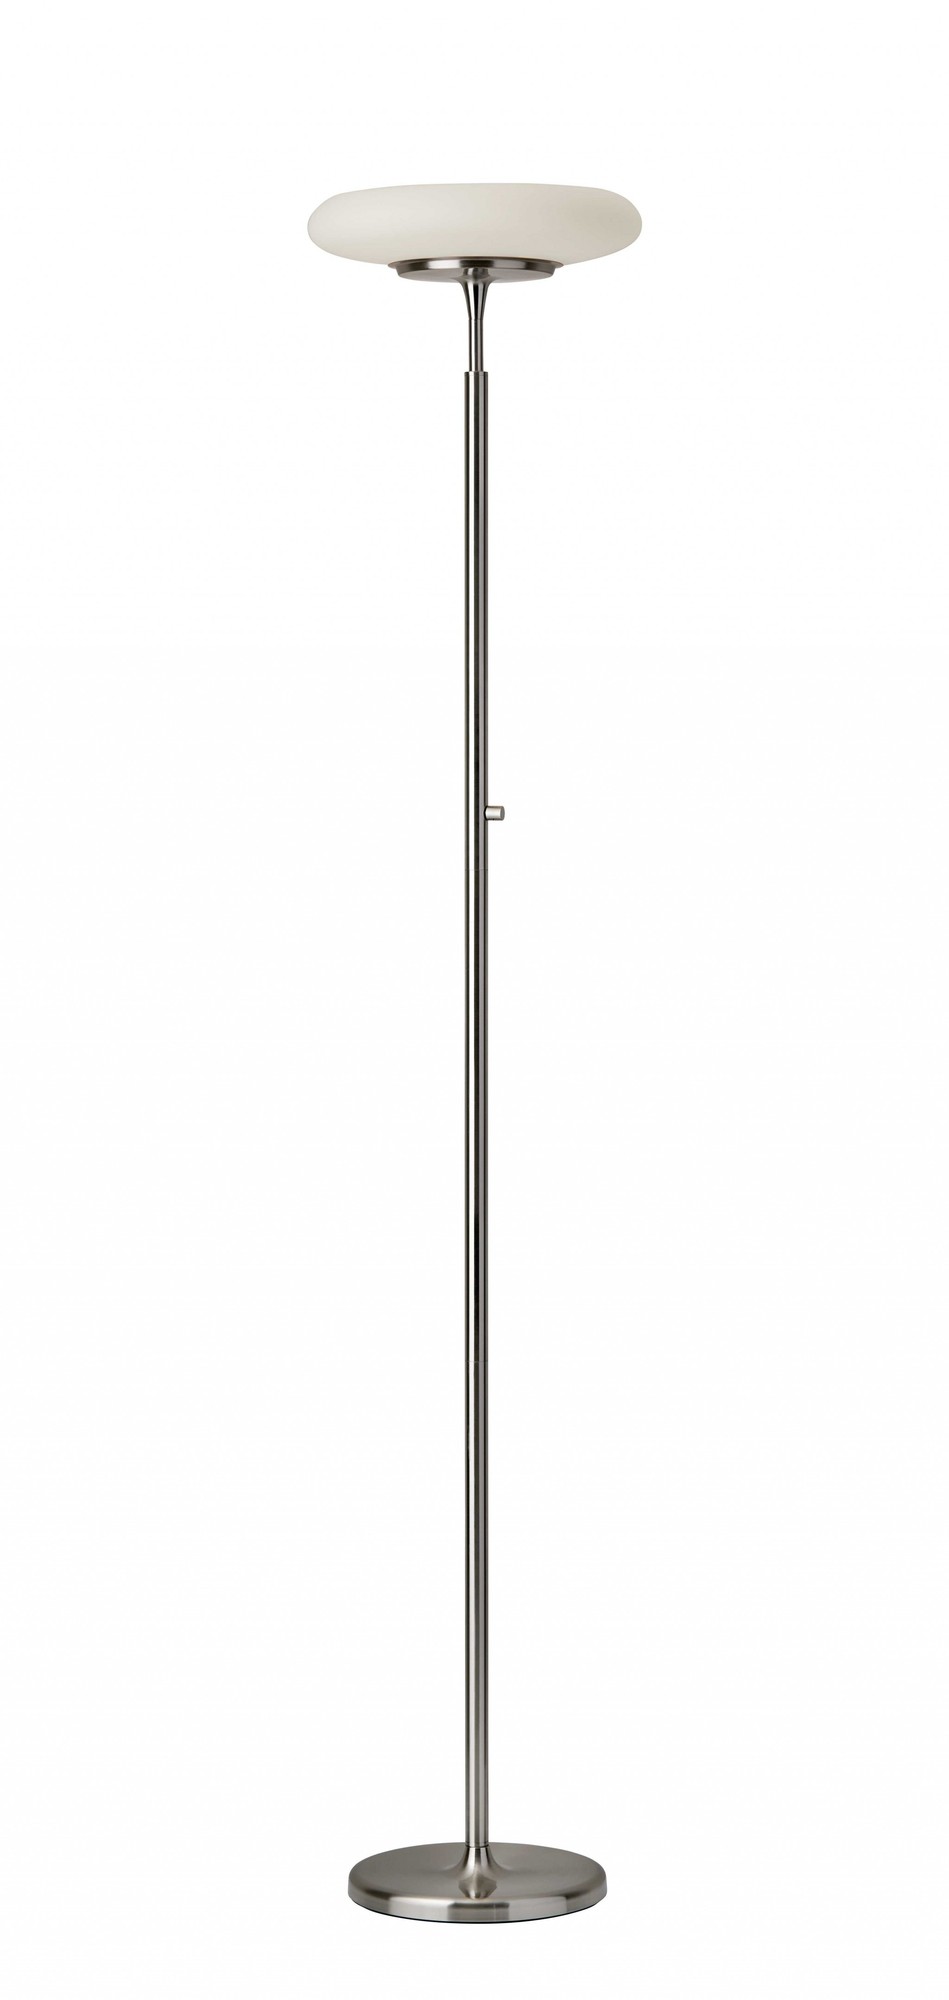 14" X 14" X 72" Brushed steel Metal LED Torchiere